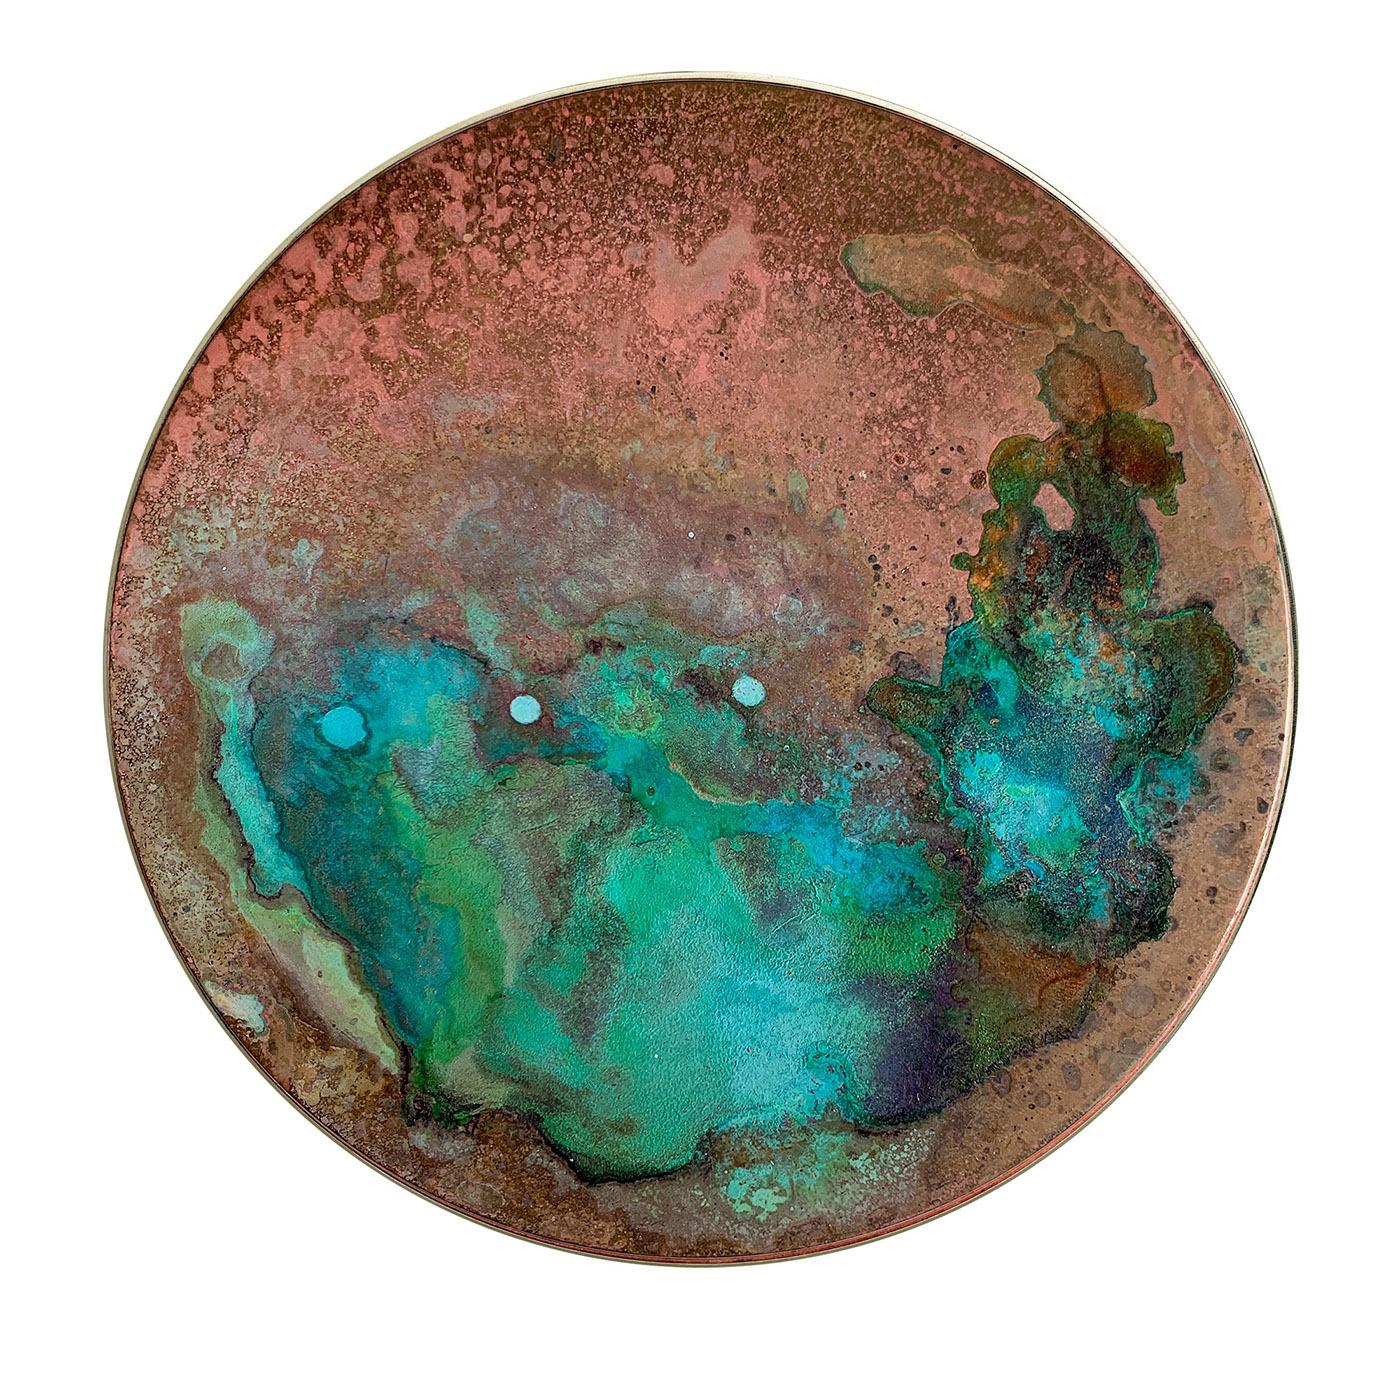 Part of the Aurora Collection, this singular decorative disk owes its breathtaking aesthetic to the unpredictable shades and traceries created by oxides. Turquoise, blue, and green merge in clouds that are set against a shaded pink-toned backdrop